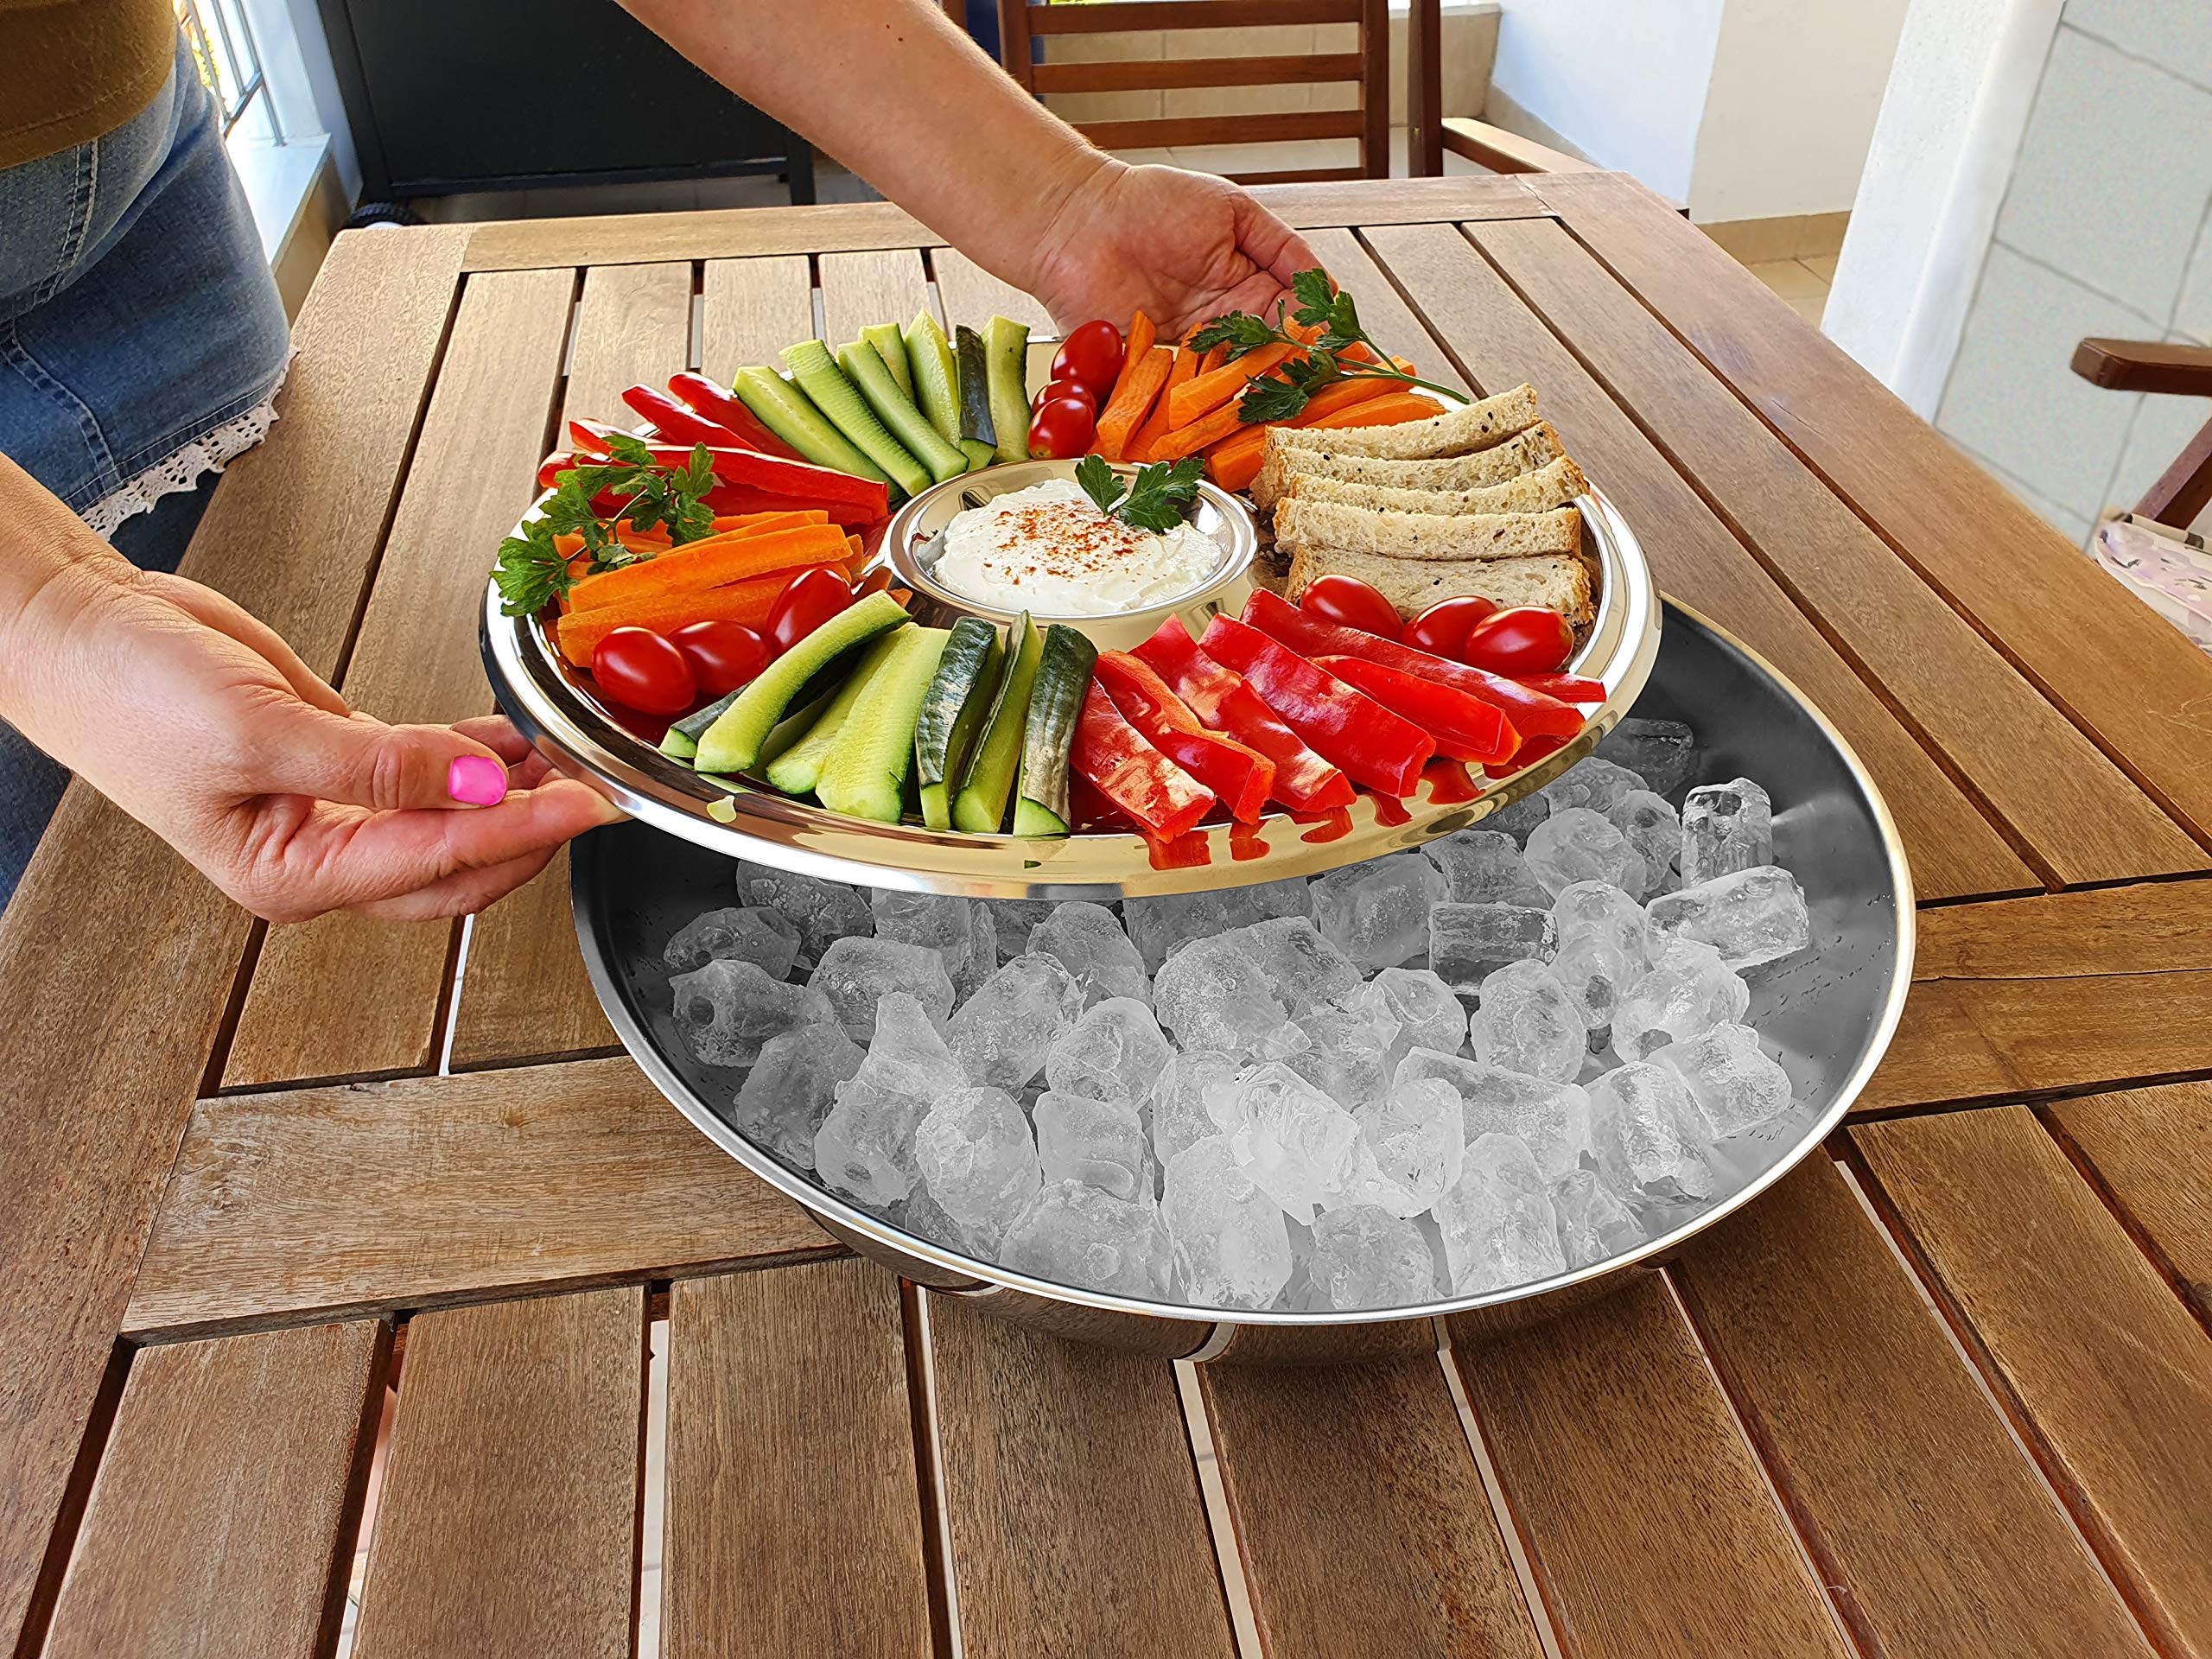 Maverick Unity Shrimp Cocktail Serving Dish and Bowl With Ice - Elegant and Large Platter for Seafood, Oysters, Crawfish, Veggies, Fruits, Salads.